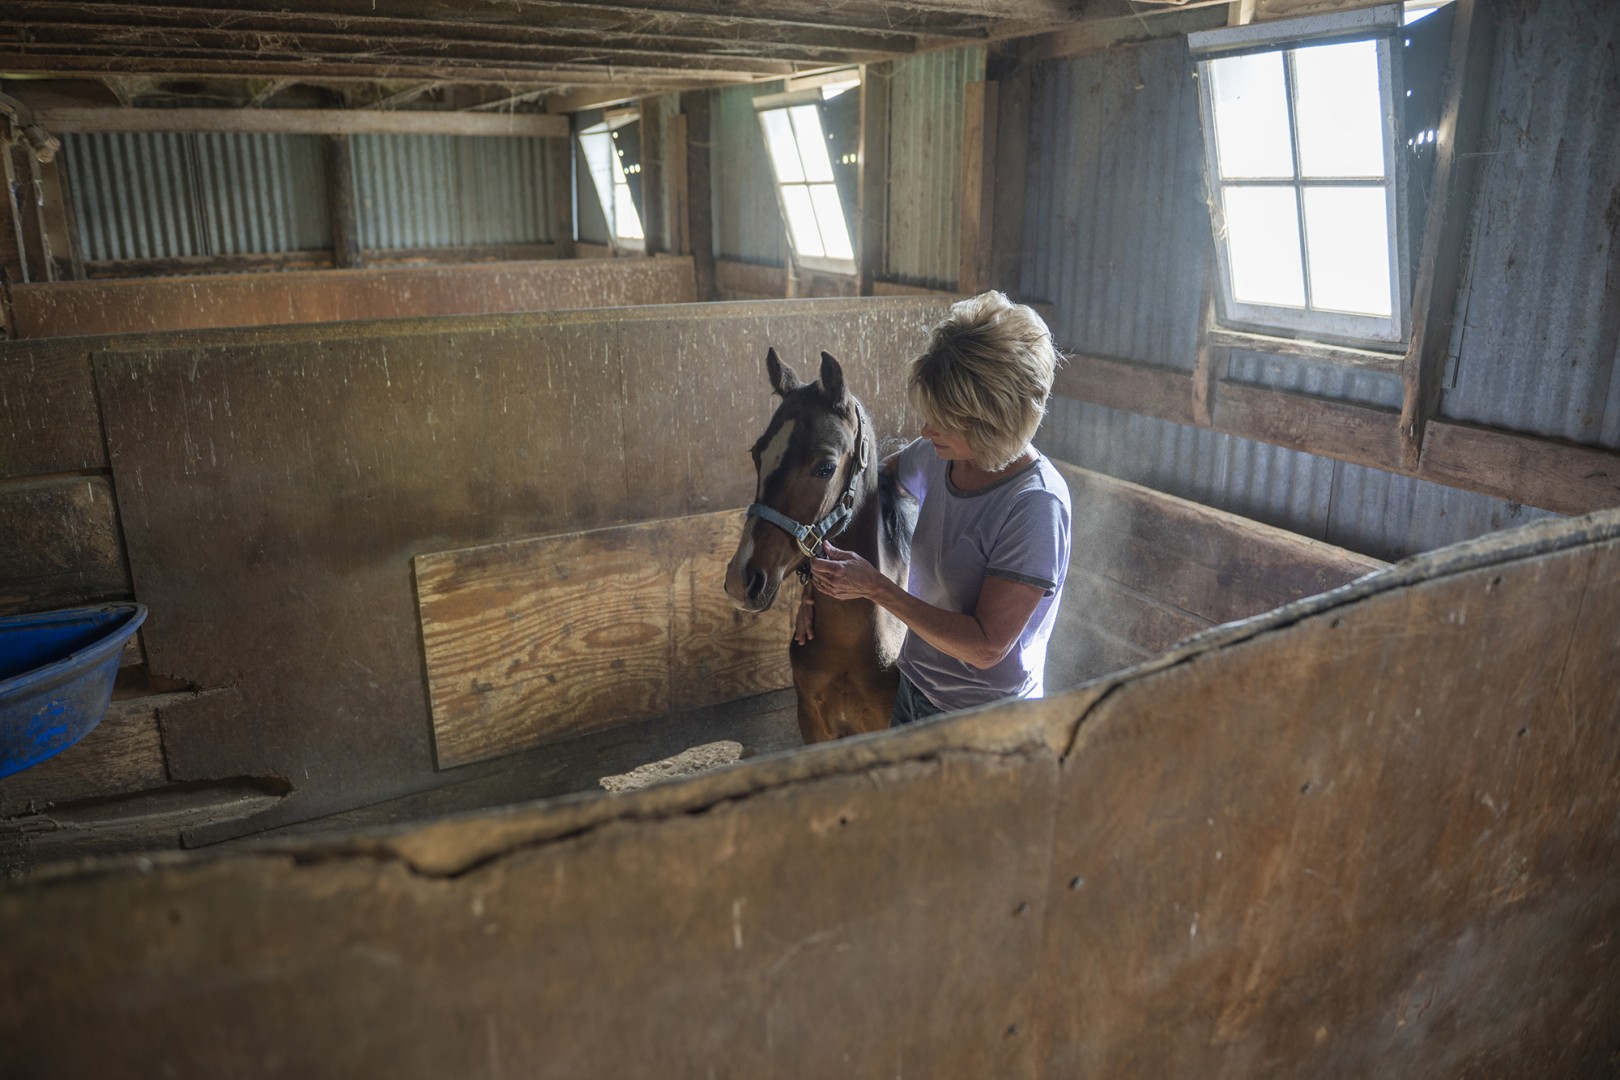 A woman pets a horse in a stable.